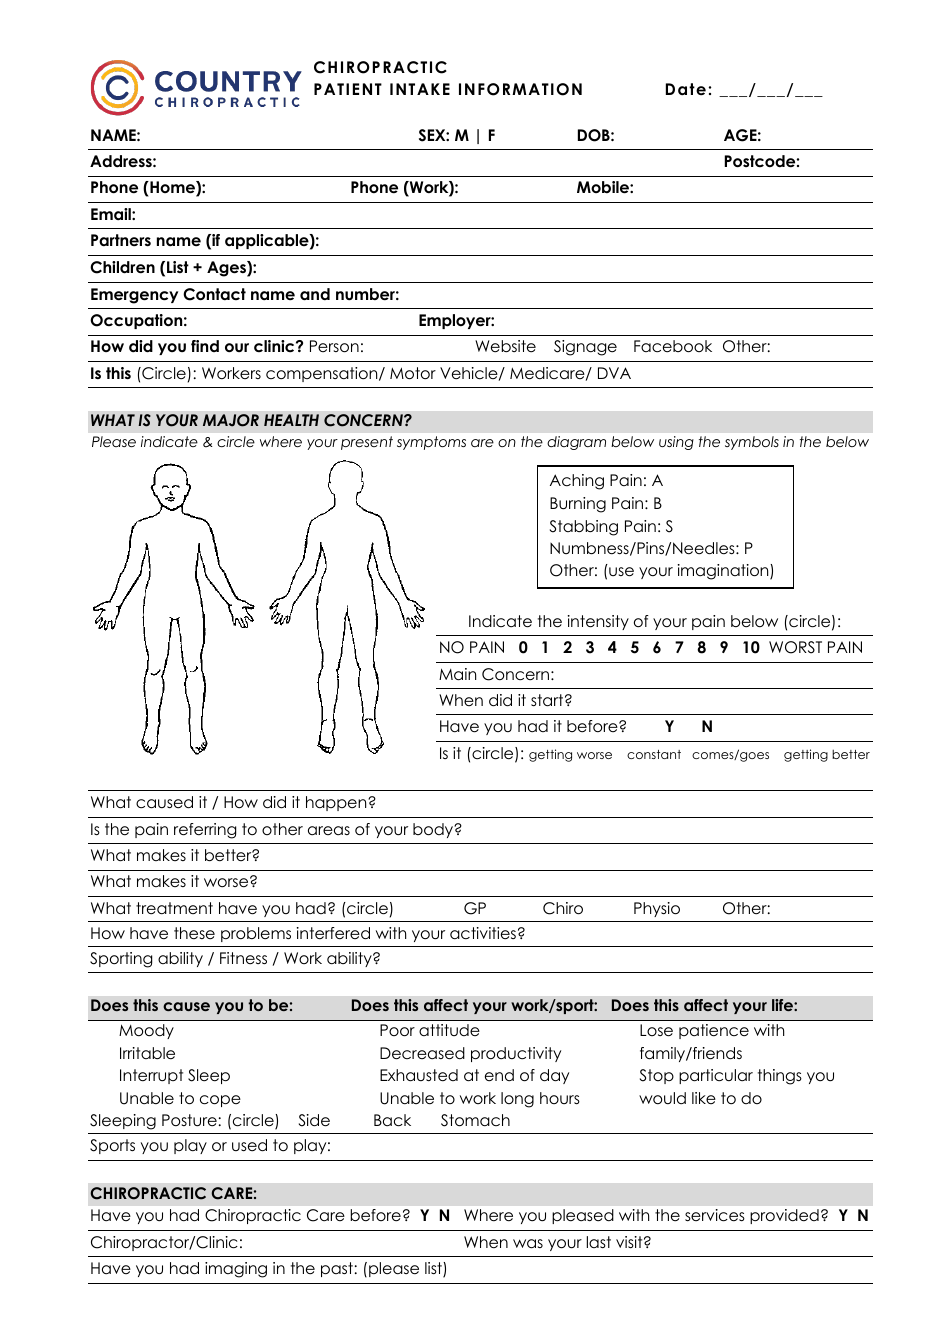 Chiropractic Patient Intake Form - Country Chiropractic, Page 1